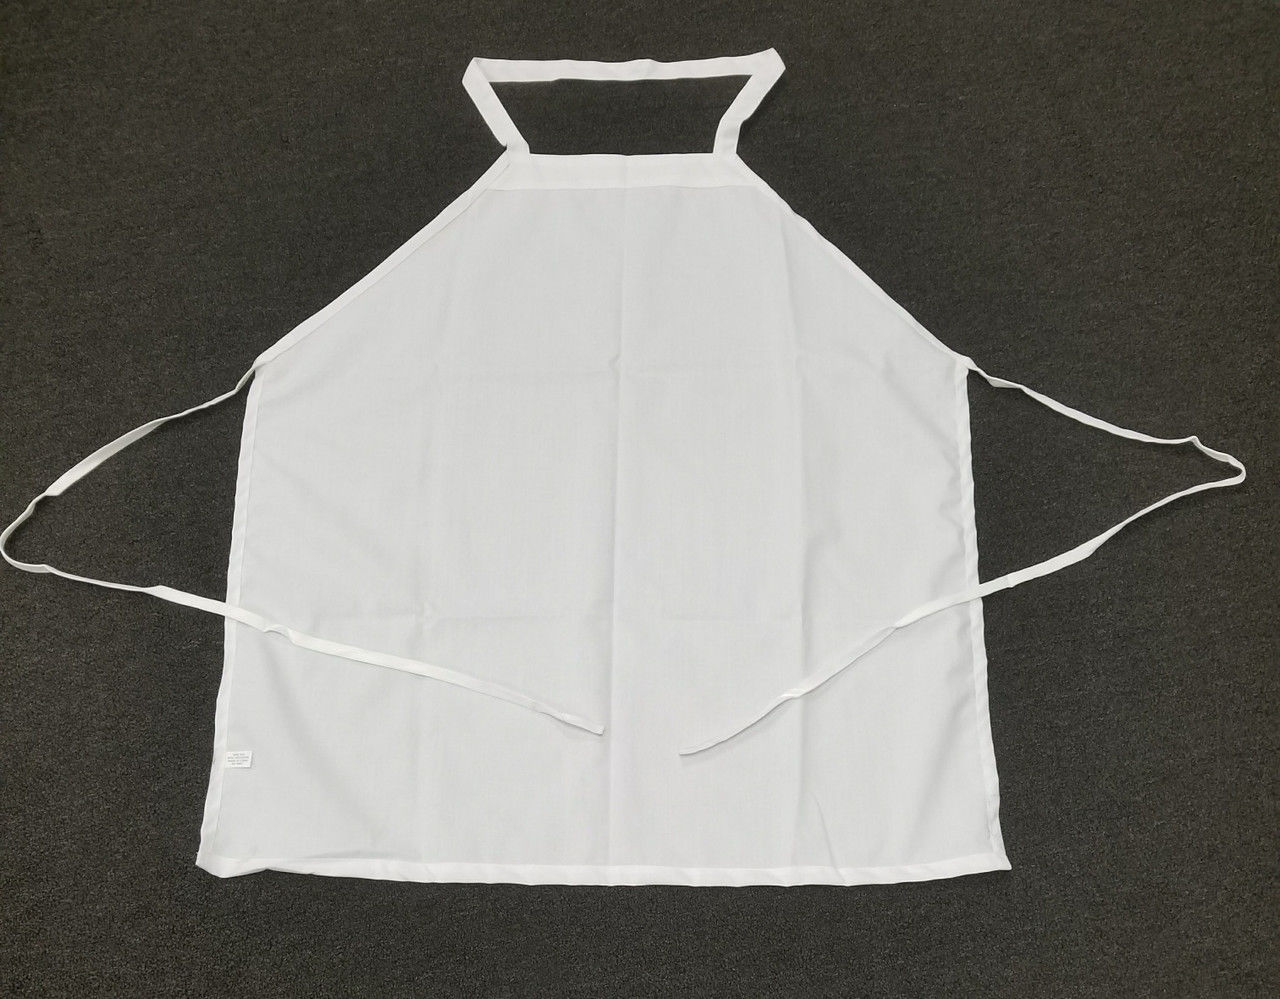 Do these aprons with pockets have ties?